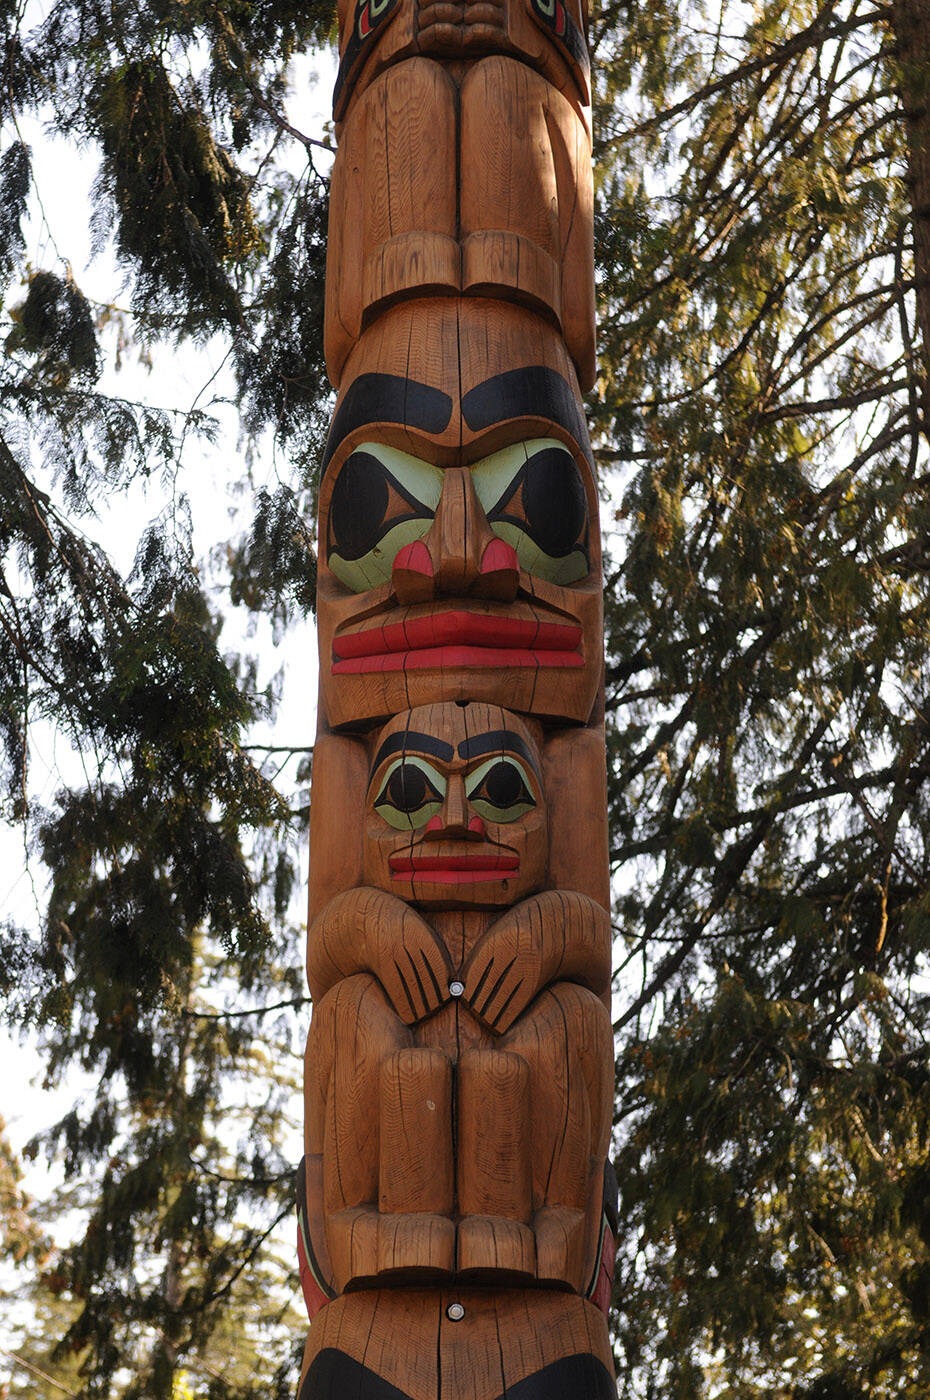 This totem pole was rededicated to the late Chief Richard Malloway outside the Cultus Lake Park Board office on Tuesday, Sept. 20, 2022. The third figure on the totem pole is a man holding a child representing Chief Richard Malloway as a family man. (Jenna Hauck/ Chilliwack Progress)